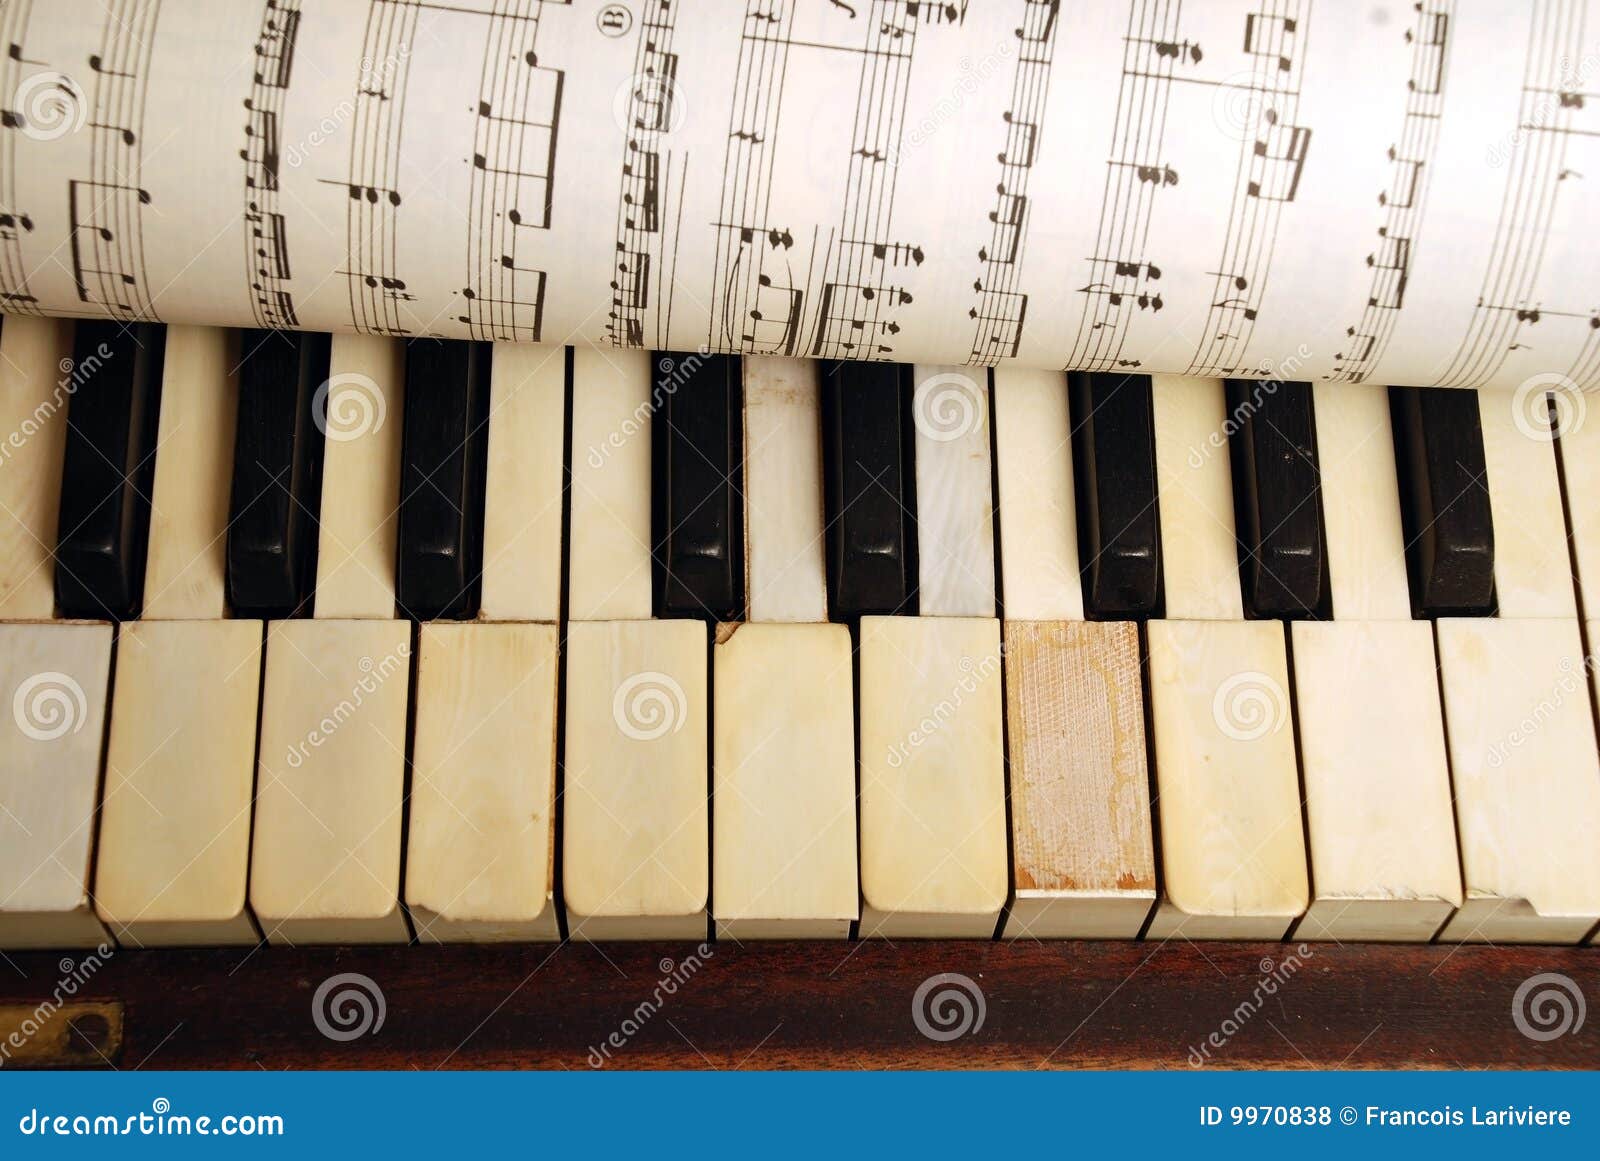 Vintage Old Piano And Sheet Of Music Notes Stock Photo Image of paper, melody 9970838